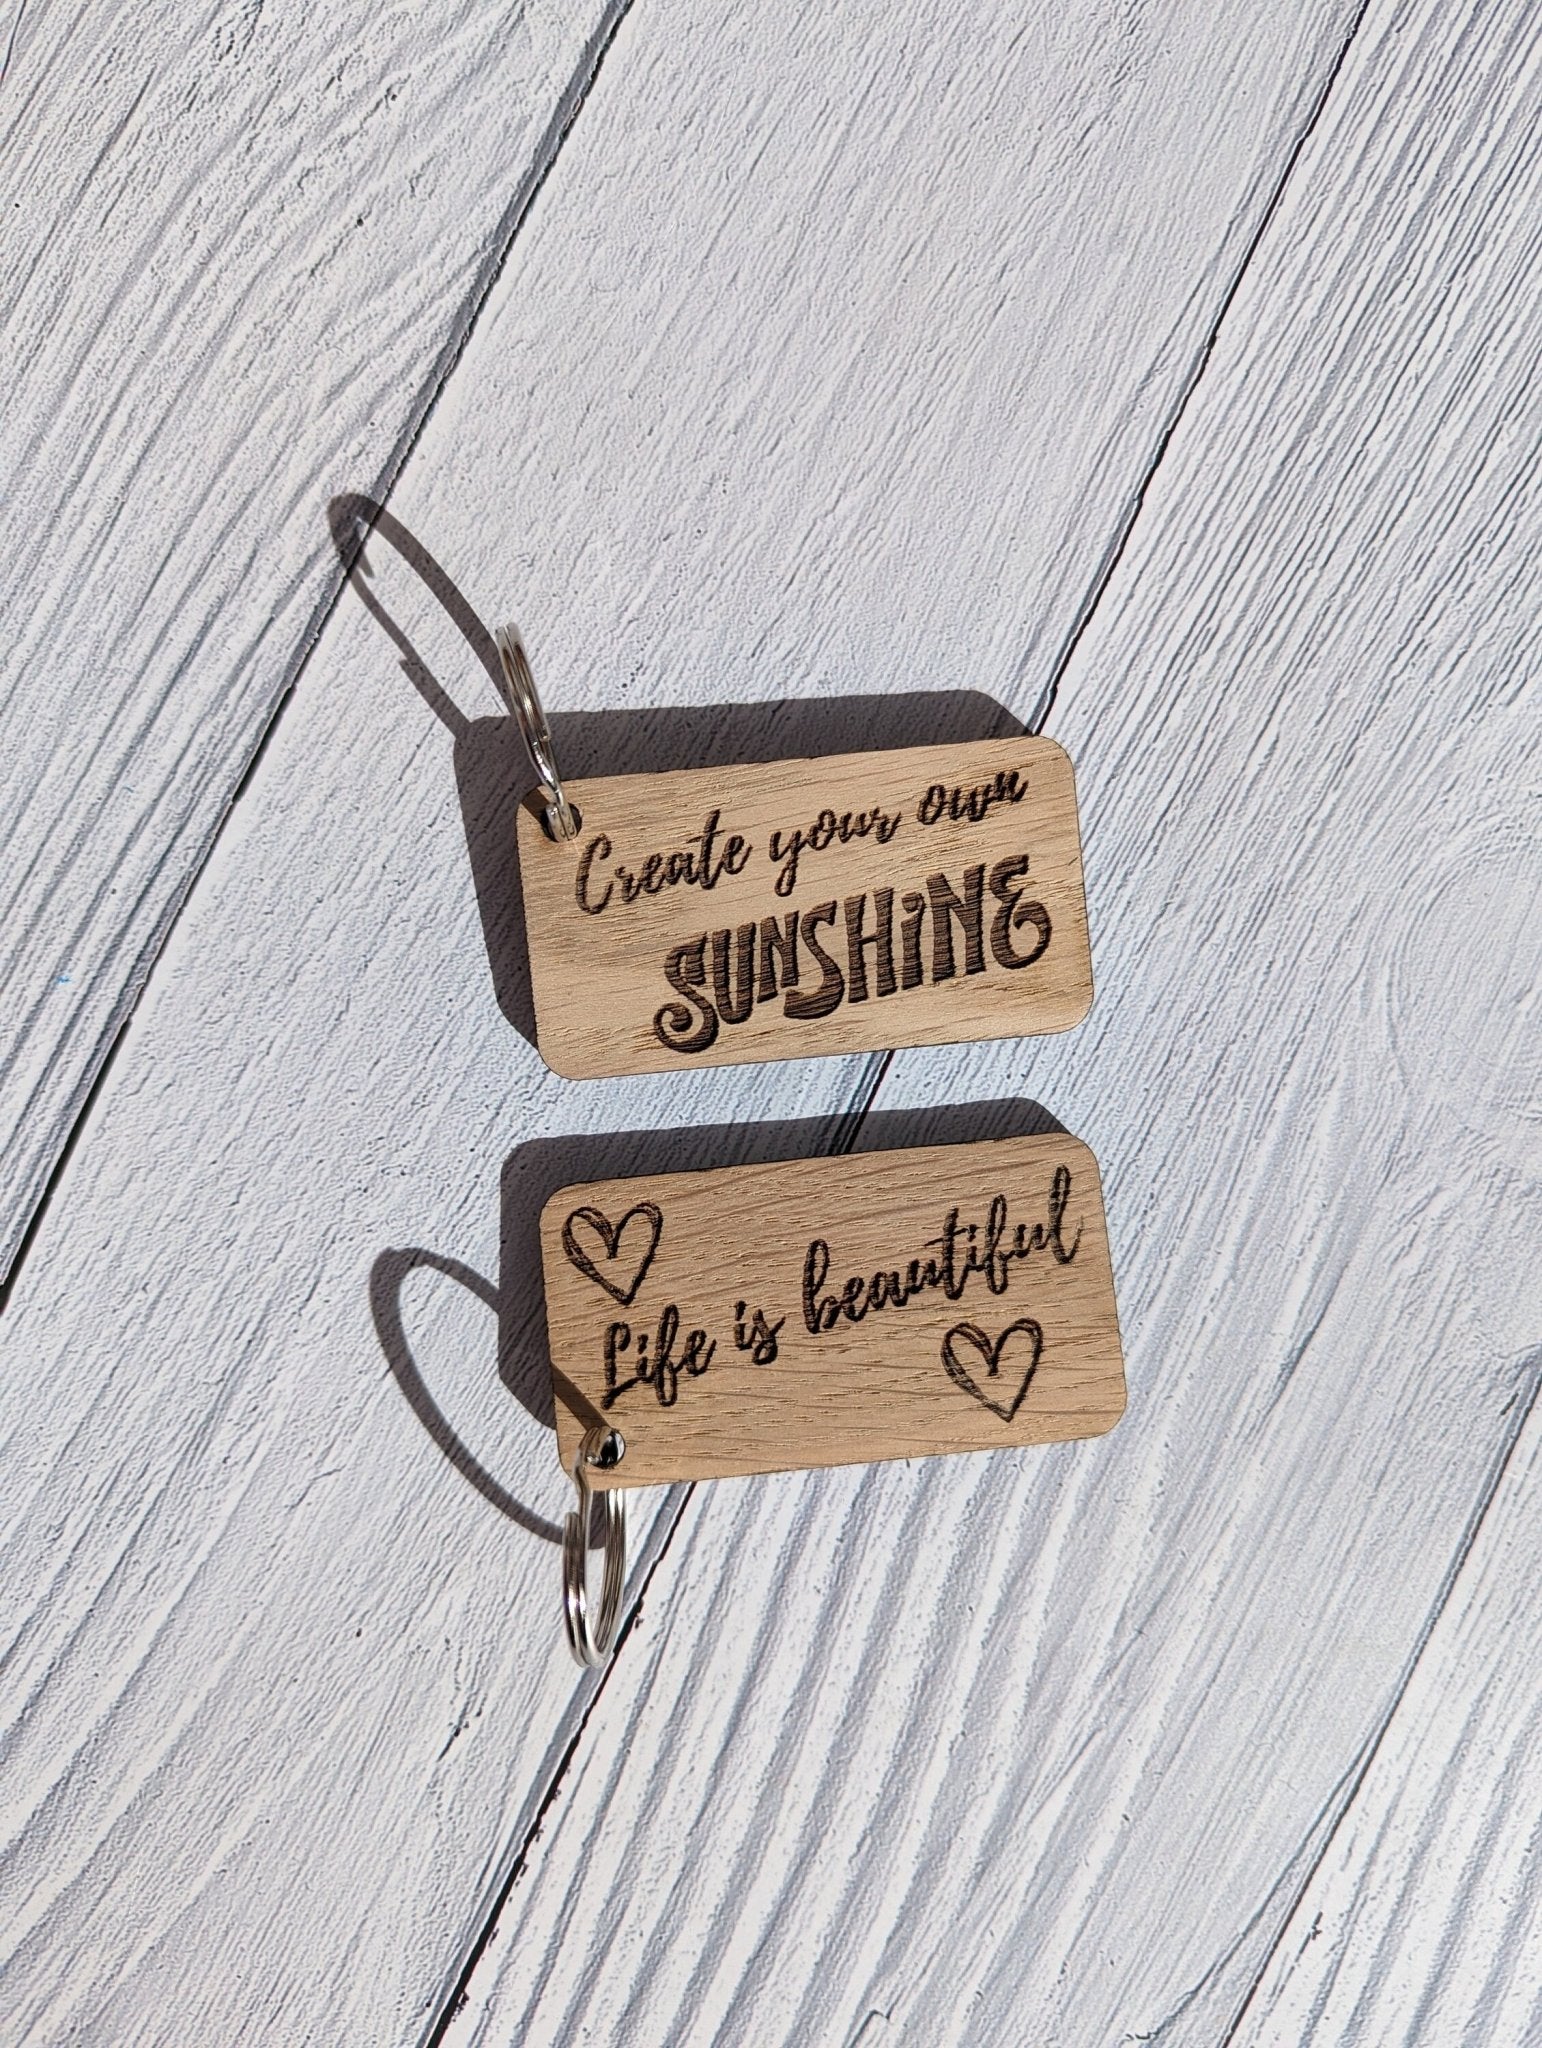 Uplifting Keyrings - "Create Your Own Sunshine" or "Life is Beautiful" - CherryGroveCraft